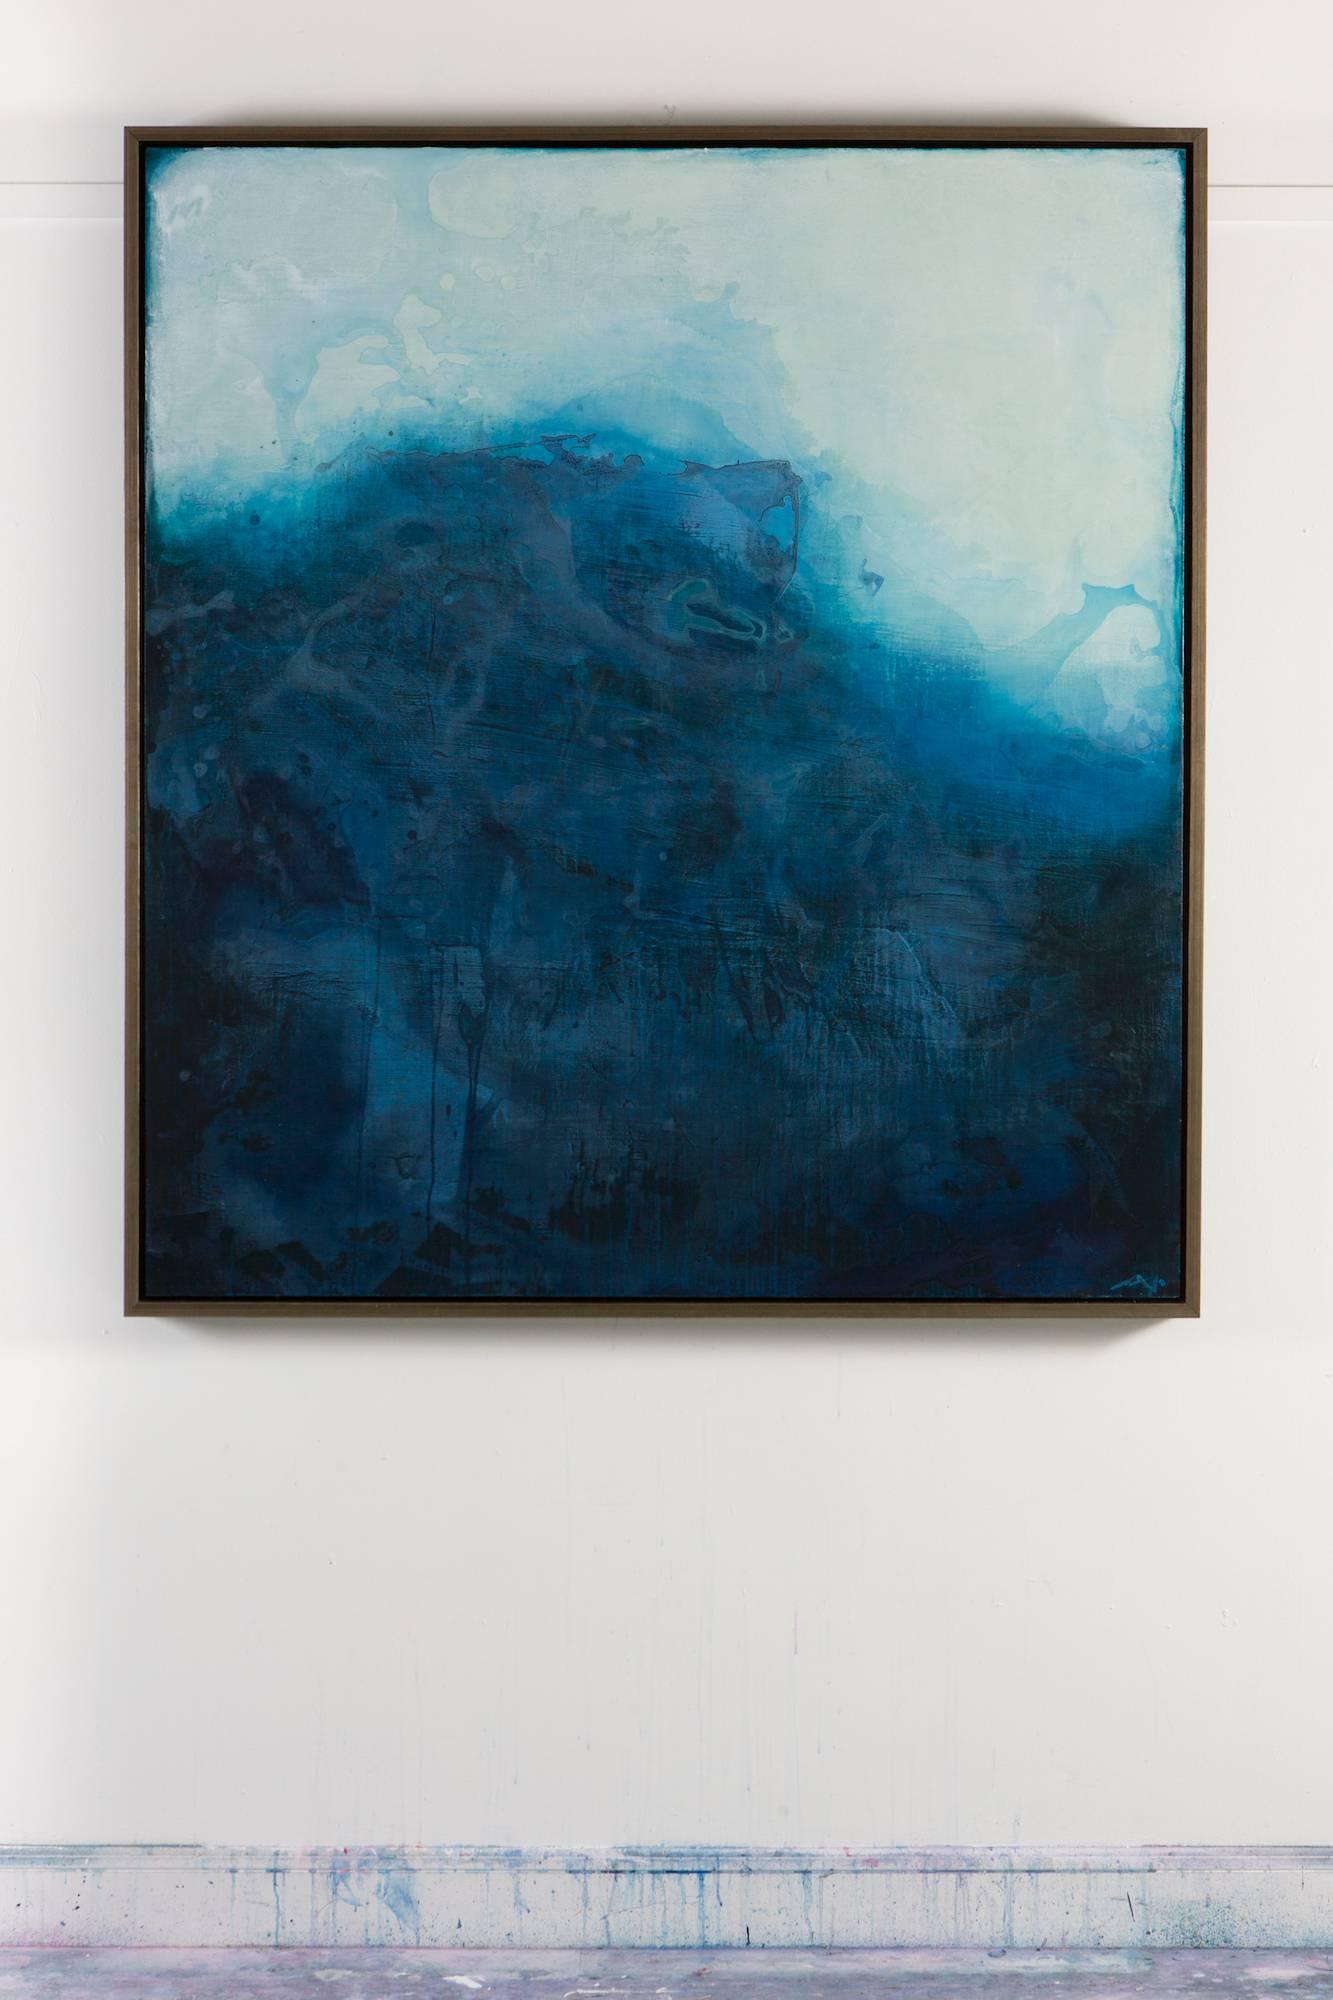 An evocative and majestic abstract landscape by Virginia based artist Abby Kasonik. The deep and intense indigo's and saturated blues tones of the work transport each viewer to a personal place of peace and serenity. The work is custom framed in a